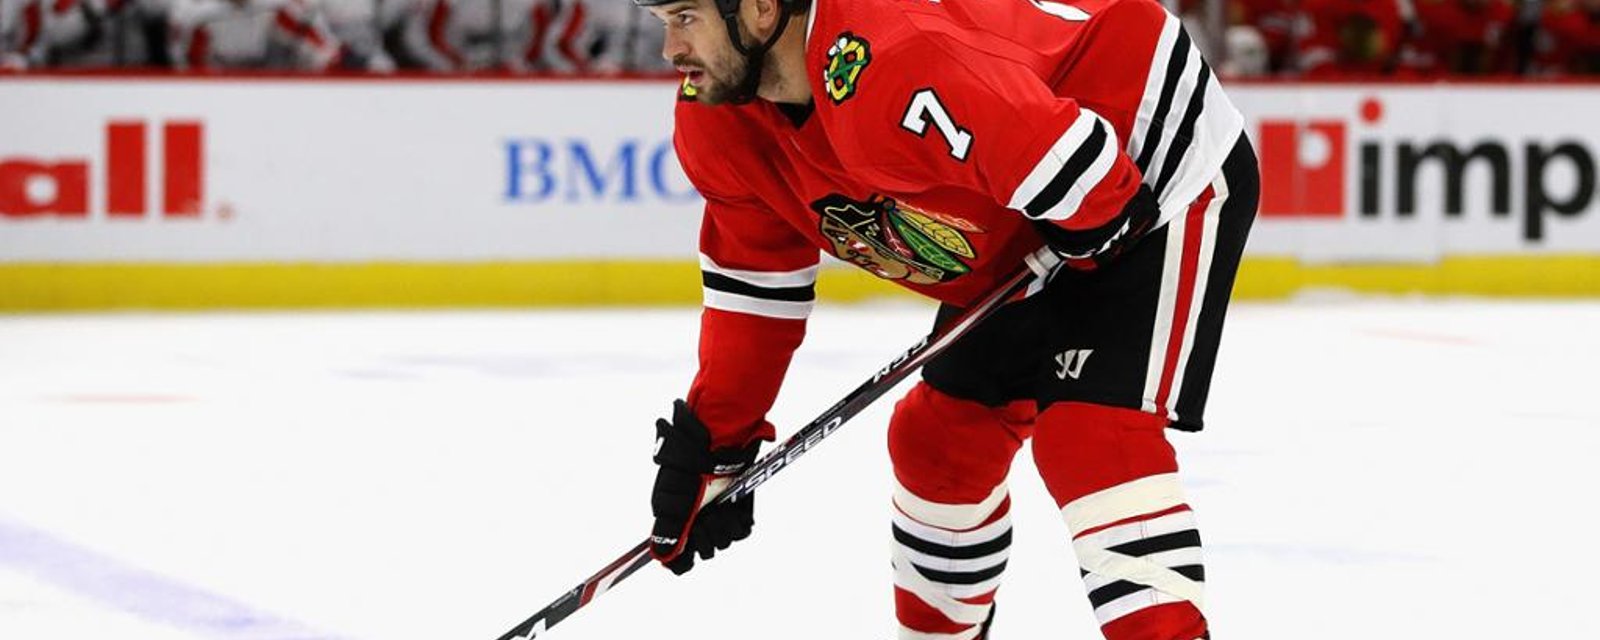 Brent Seabrook’s NHL career is over : he retires due to injury